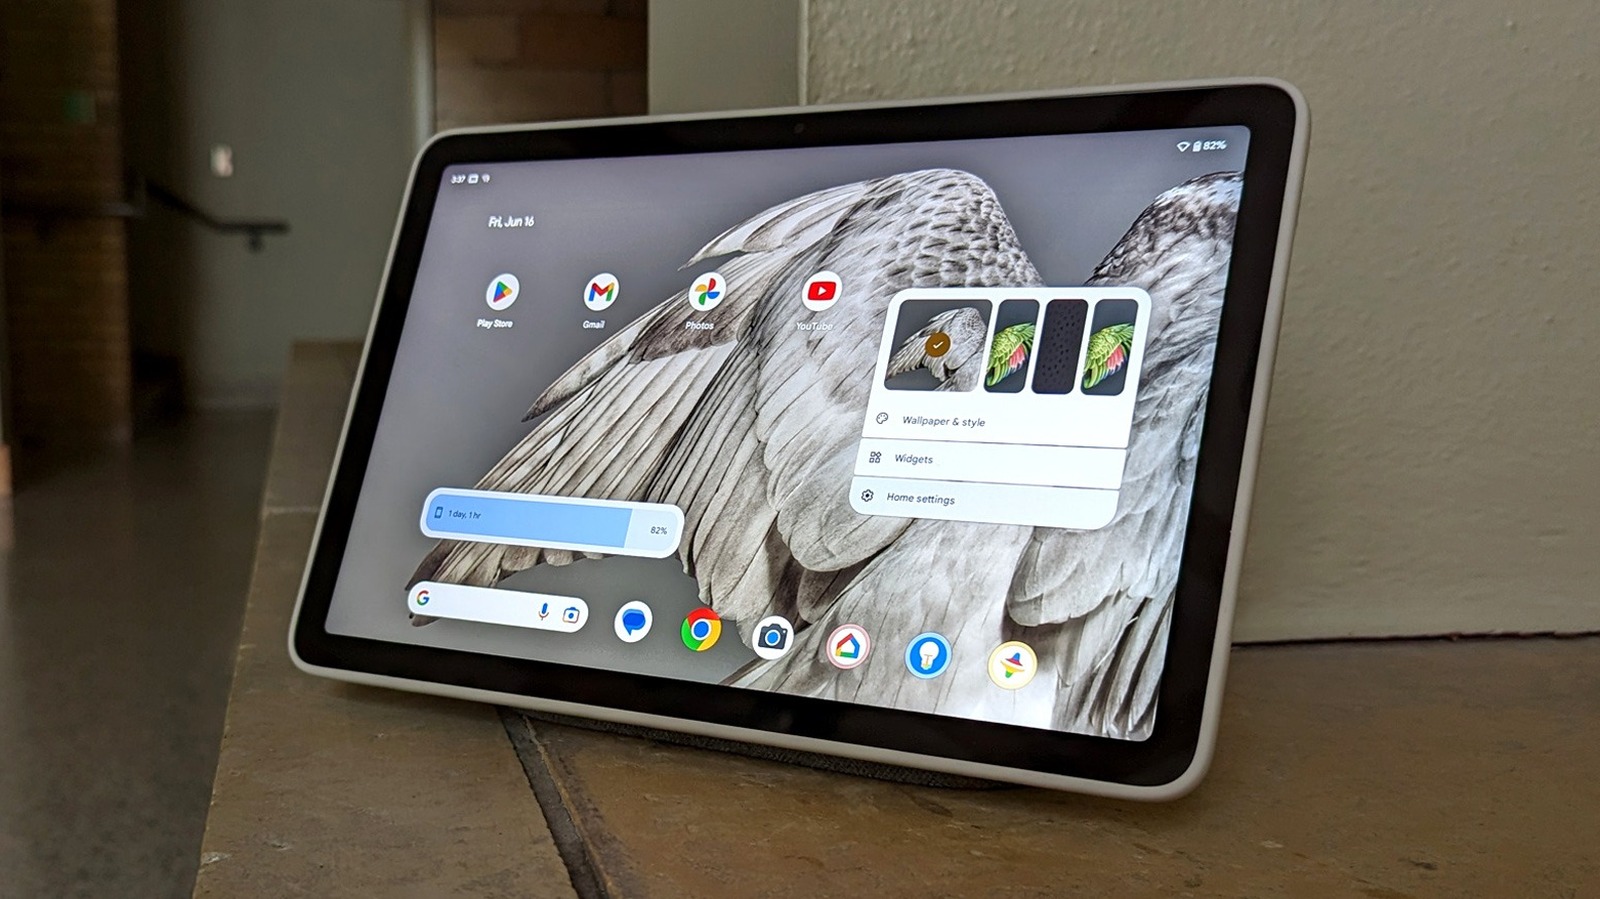 Google Pixel Tablet Review—A Better Smart Home Hub Than Tablet